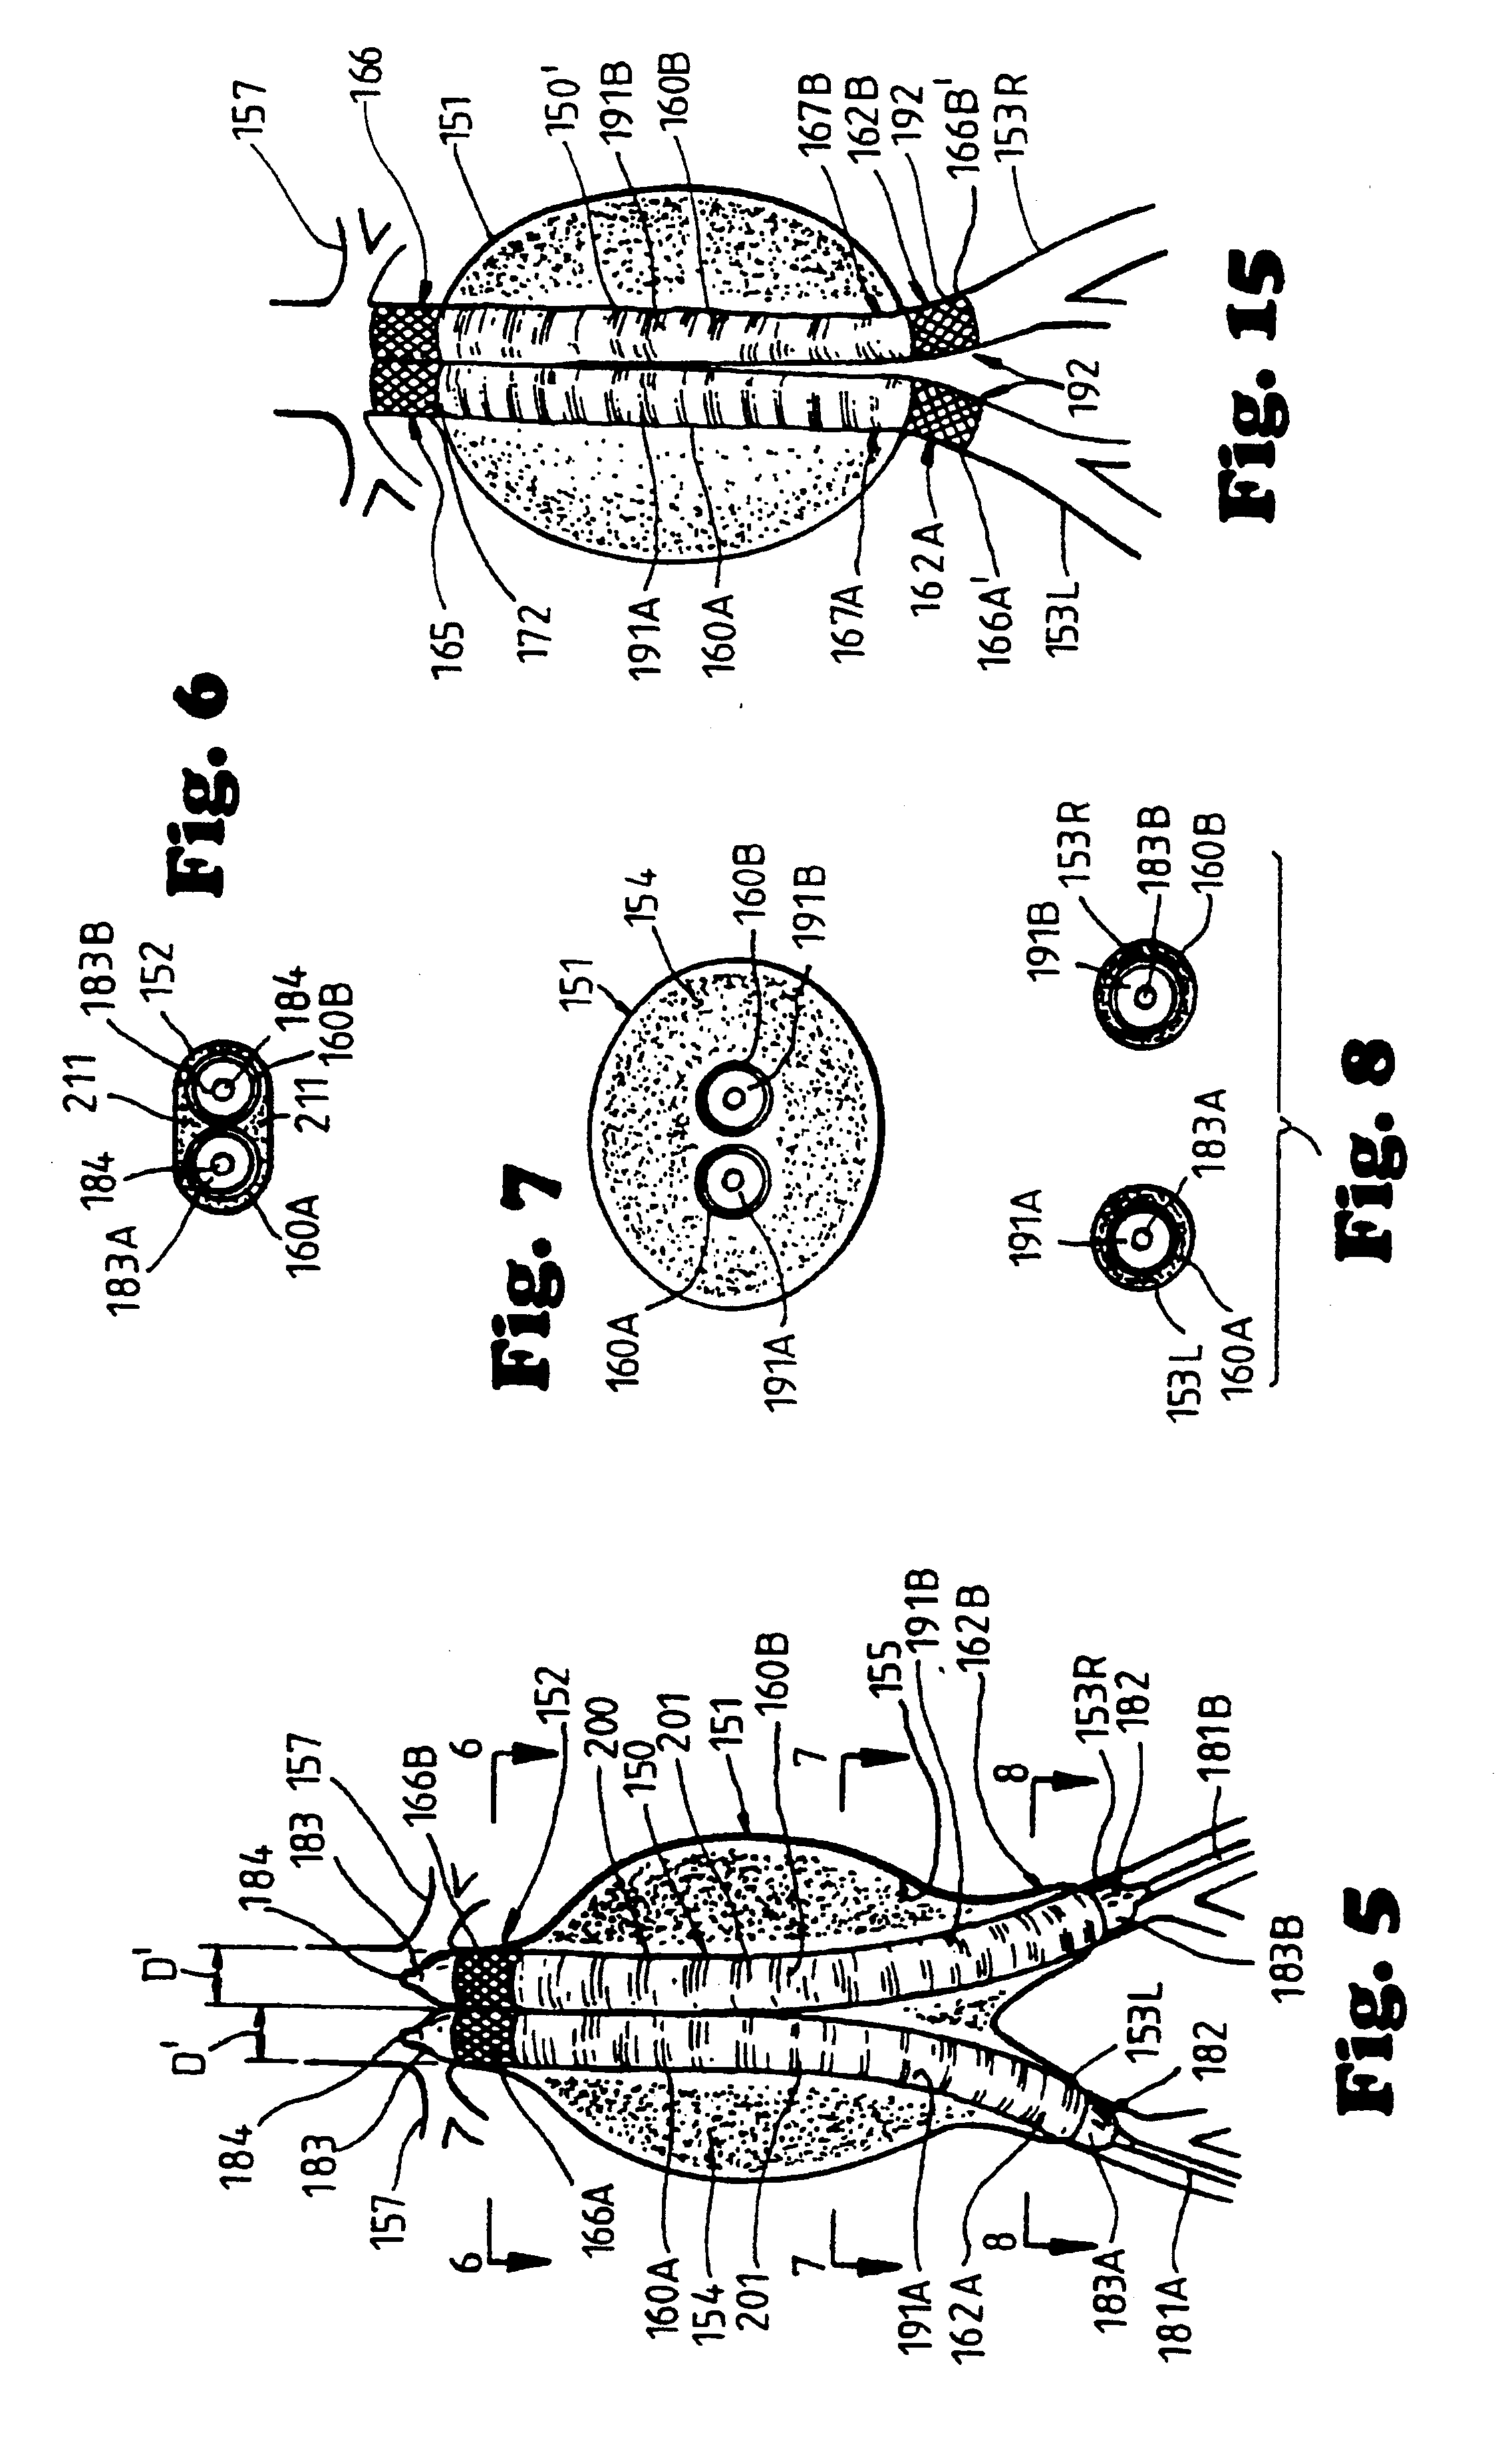 Method and apparatus for bilateral intra-aortic bypass